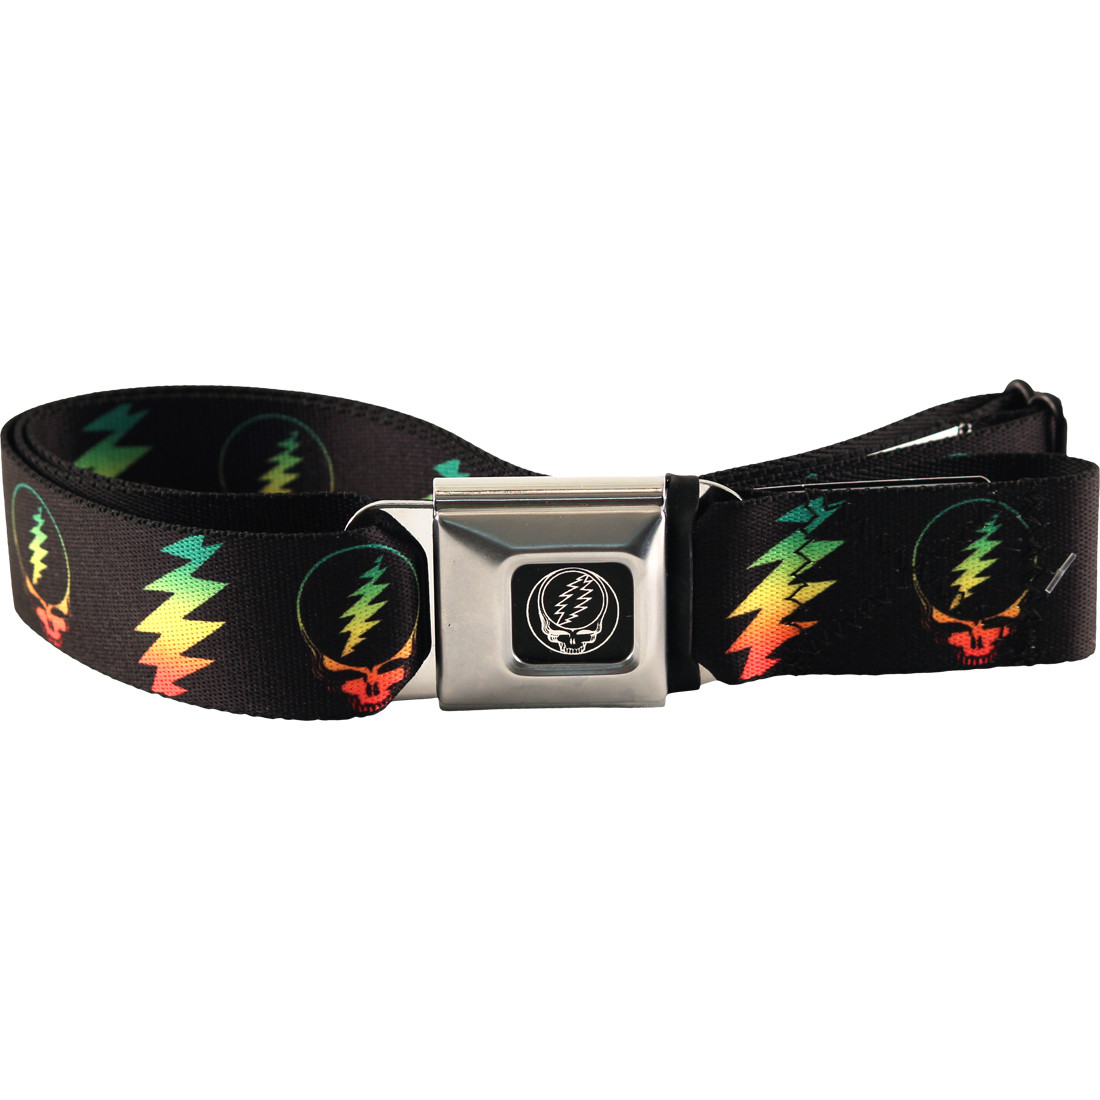 32-52 Inches in Length 1.5 Wide Buckle-Down Seatbelt Belt Paw Print Black//Multi Color